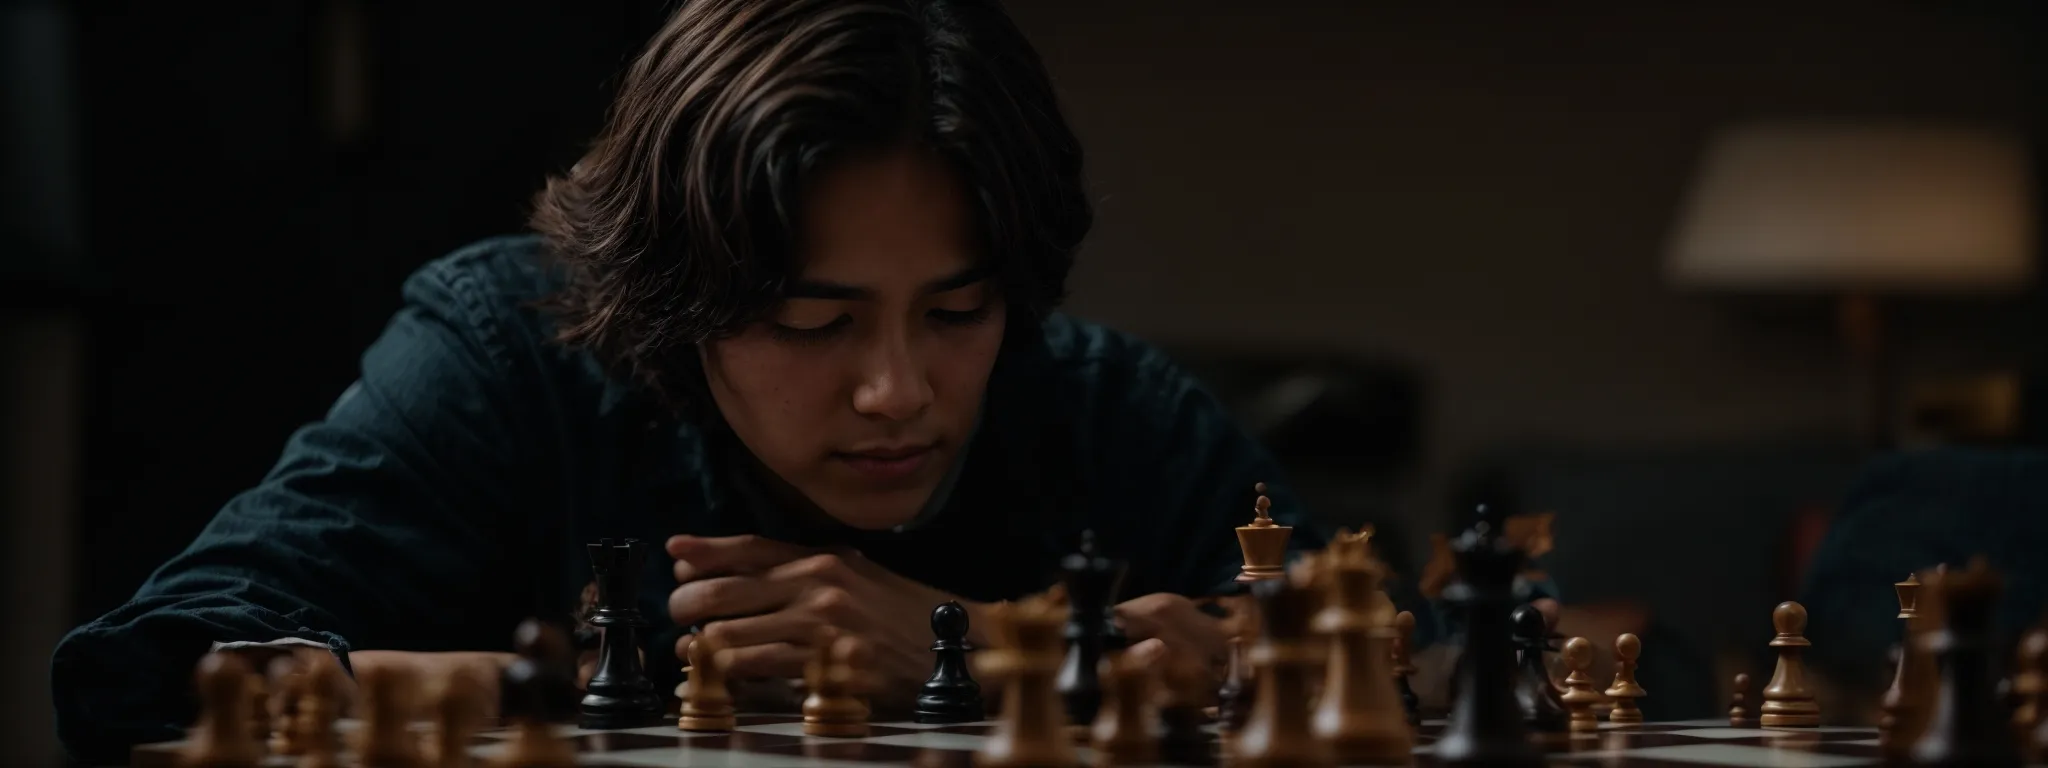 a chess player intently studies a chessboard, contemplating the next strategic move.